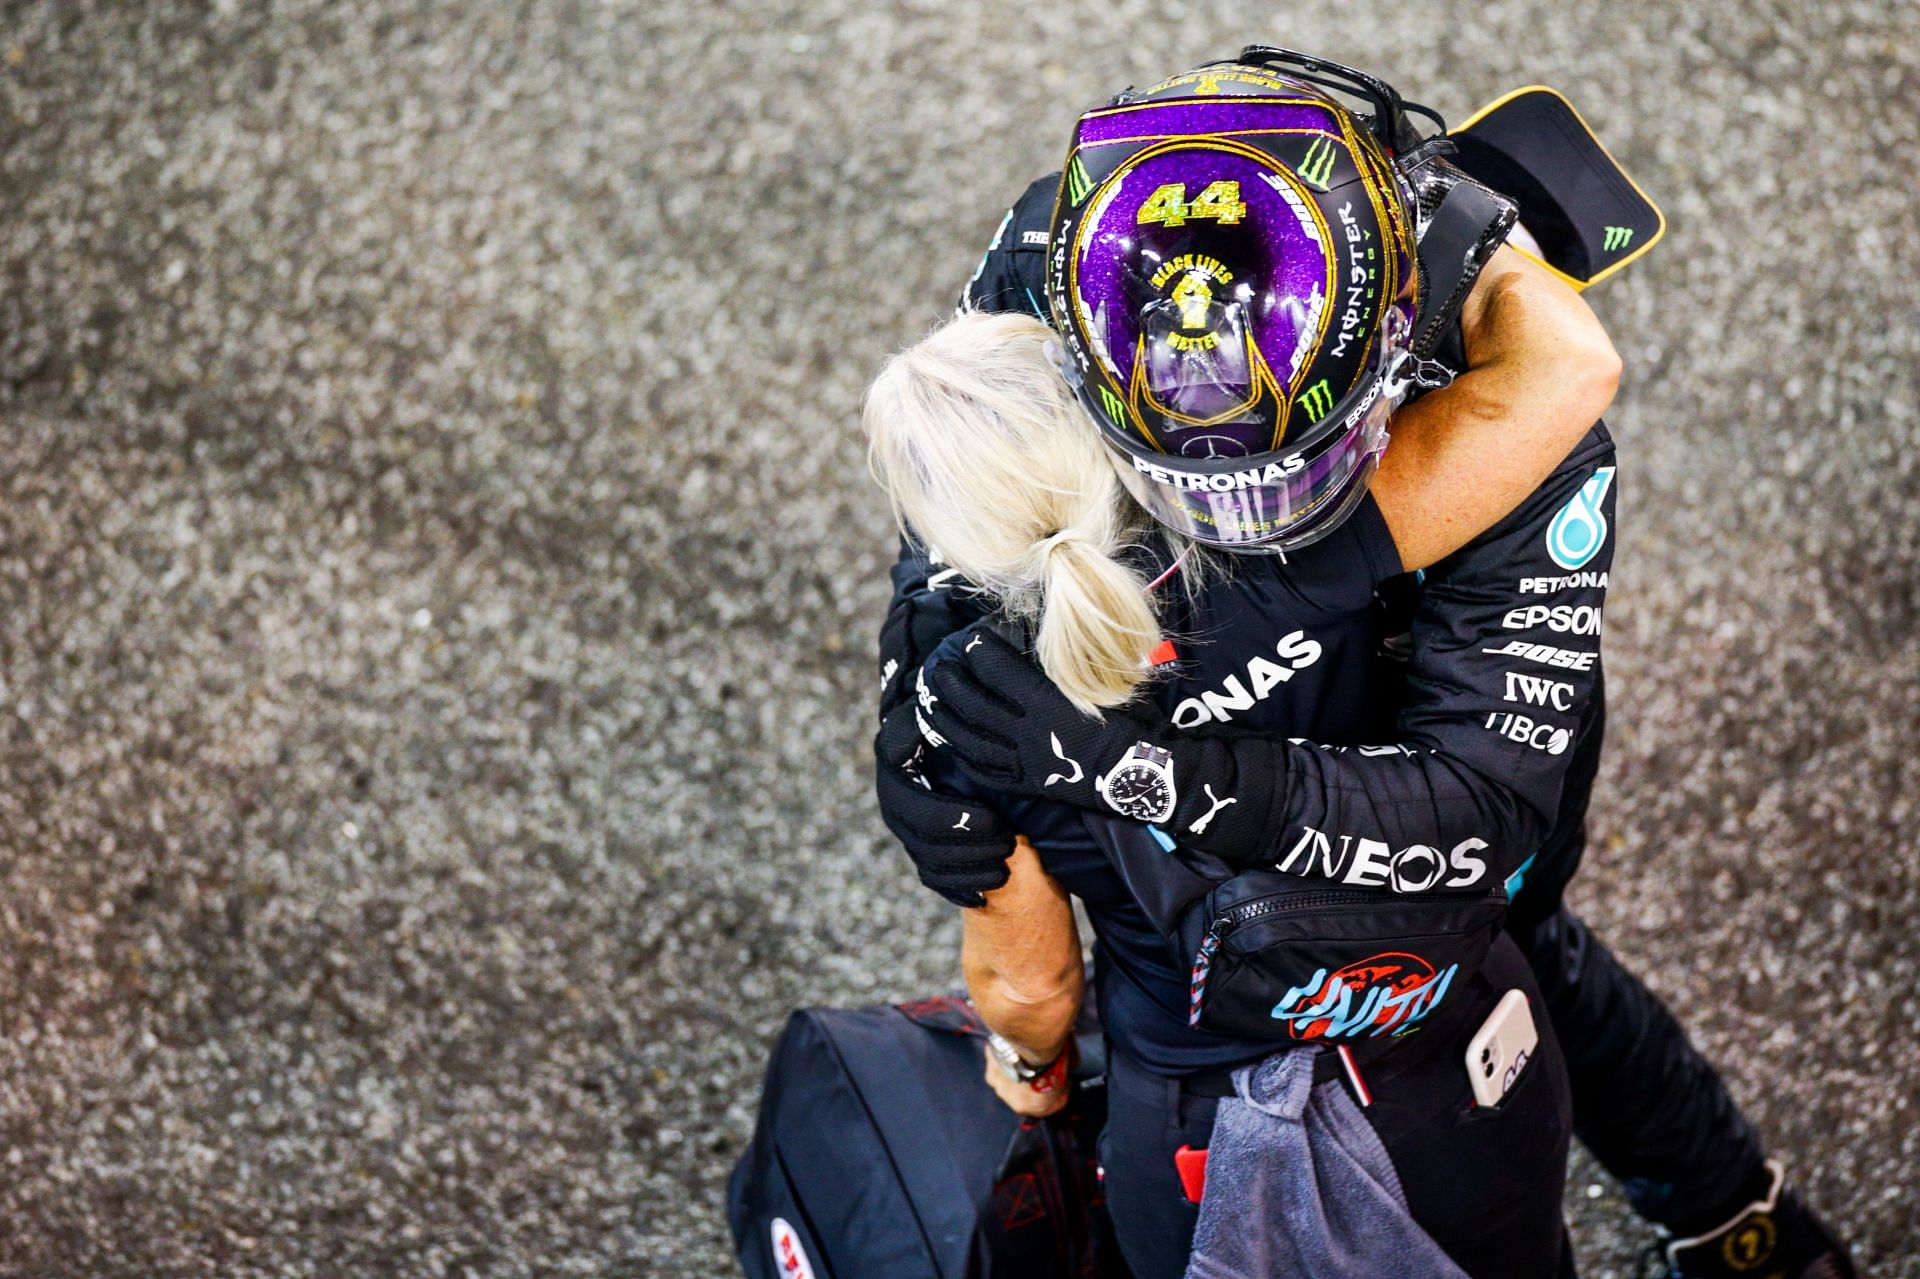 F1 Grand Prix of Abu Dhabi - Lewis Hamilton and Angela Cullen share a moment